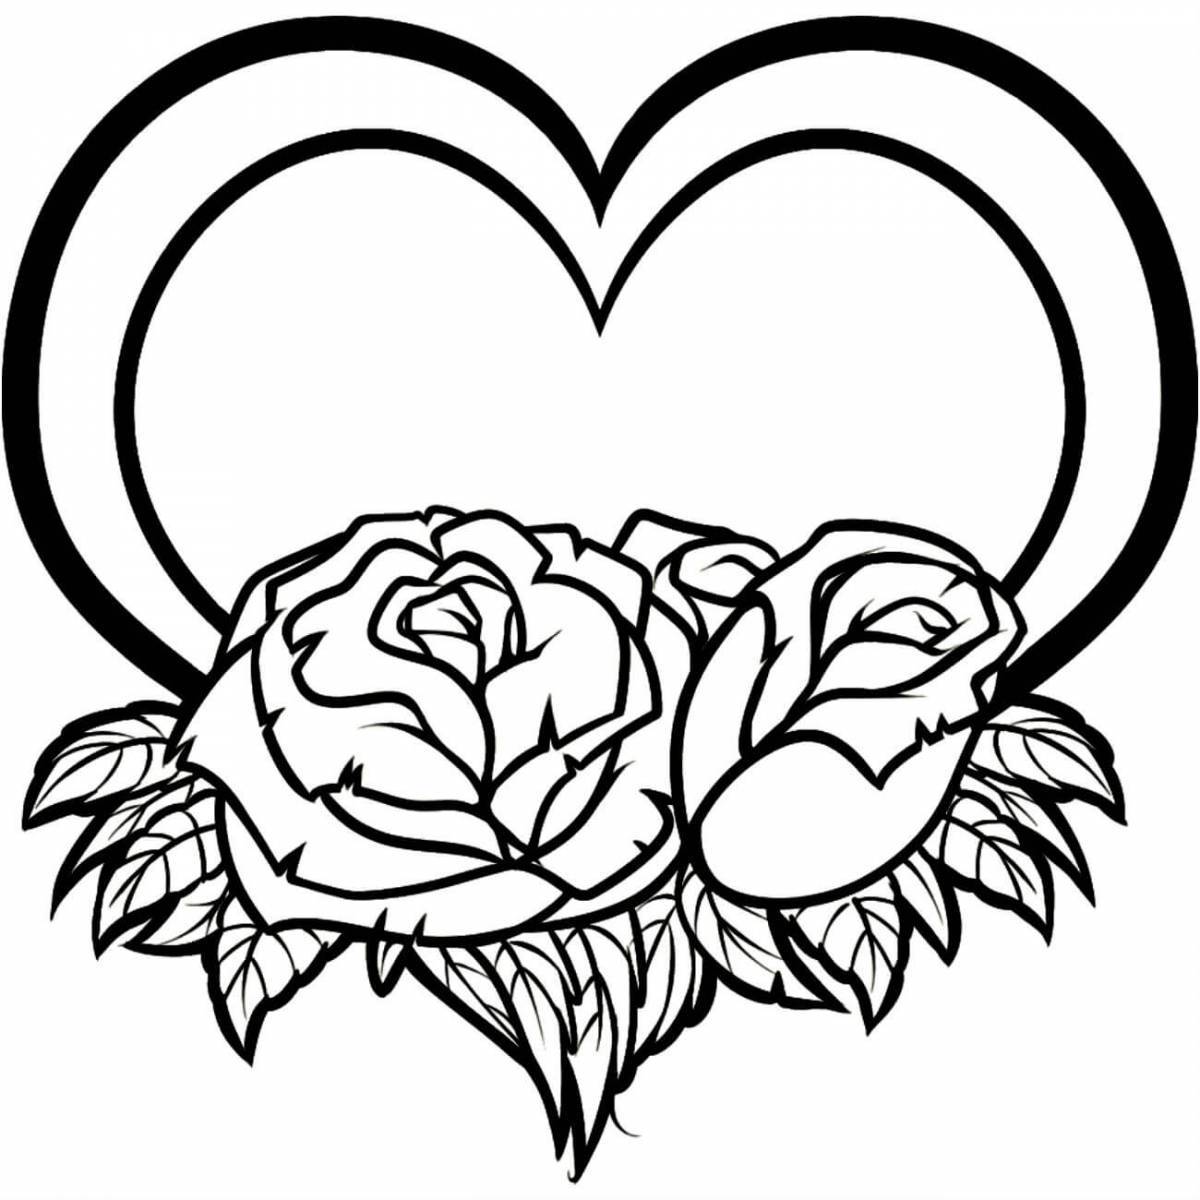 Exquisite heart coloring book